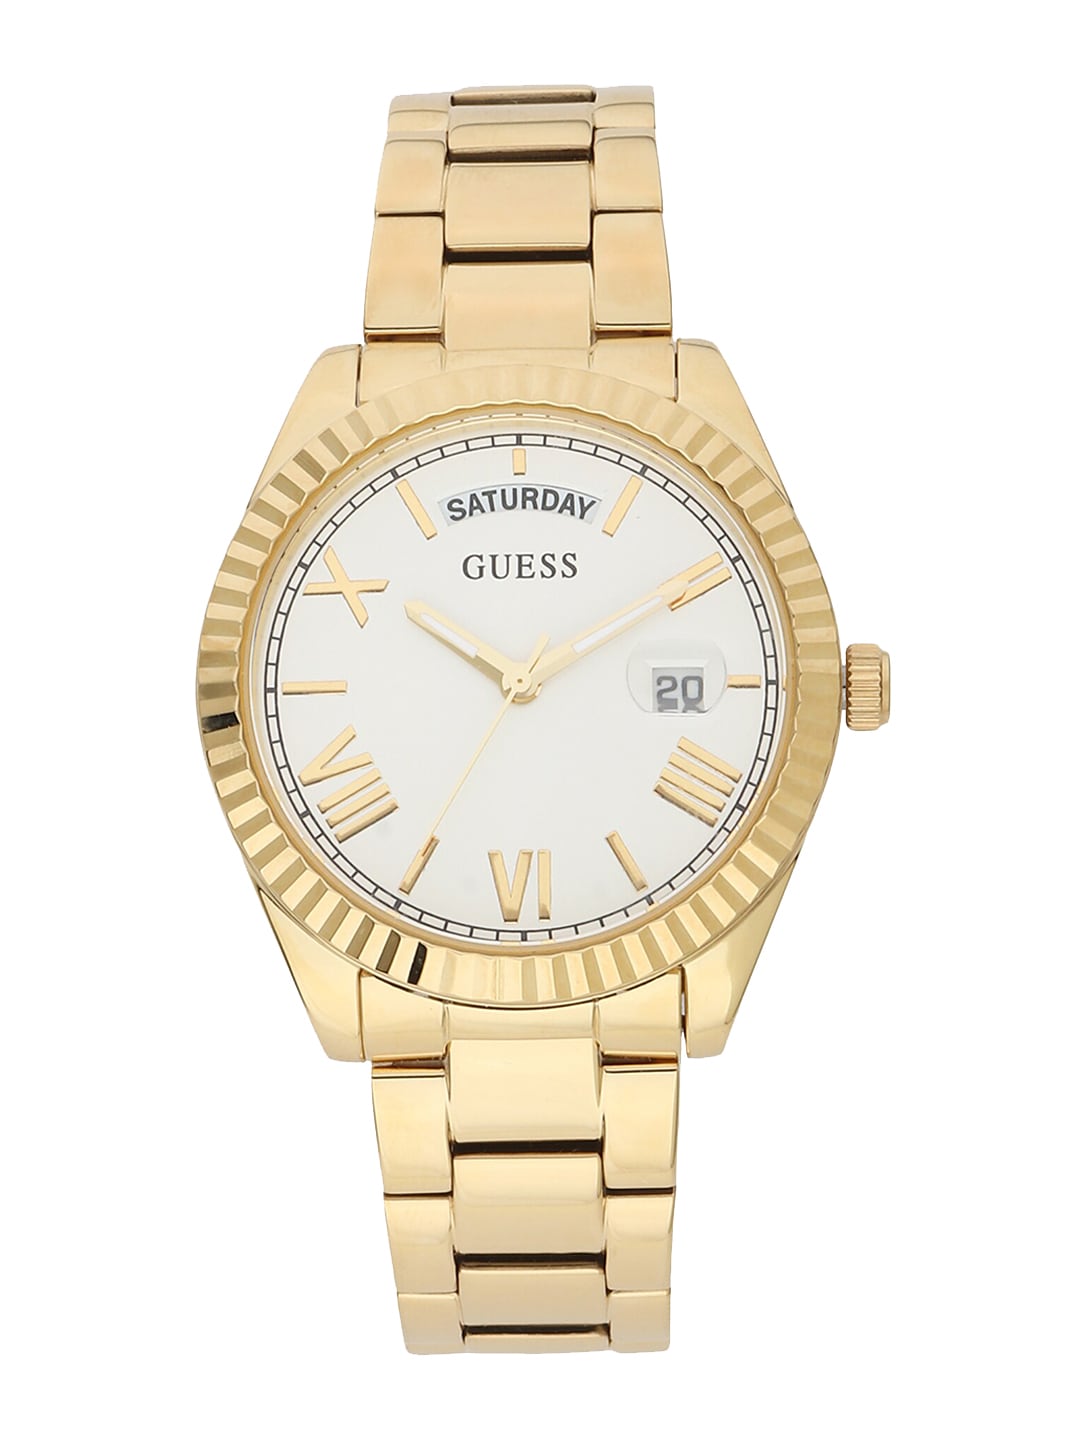 GUESS Women White Dial & Gold Toned Stainless Steel Bracelet Style Straps Analogue Watch GW0308L2 Price in India